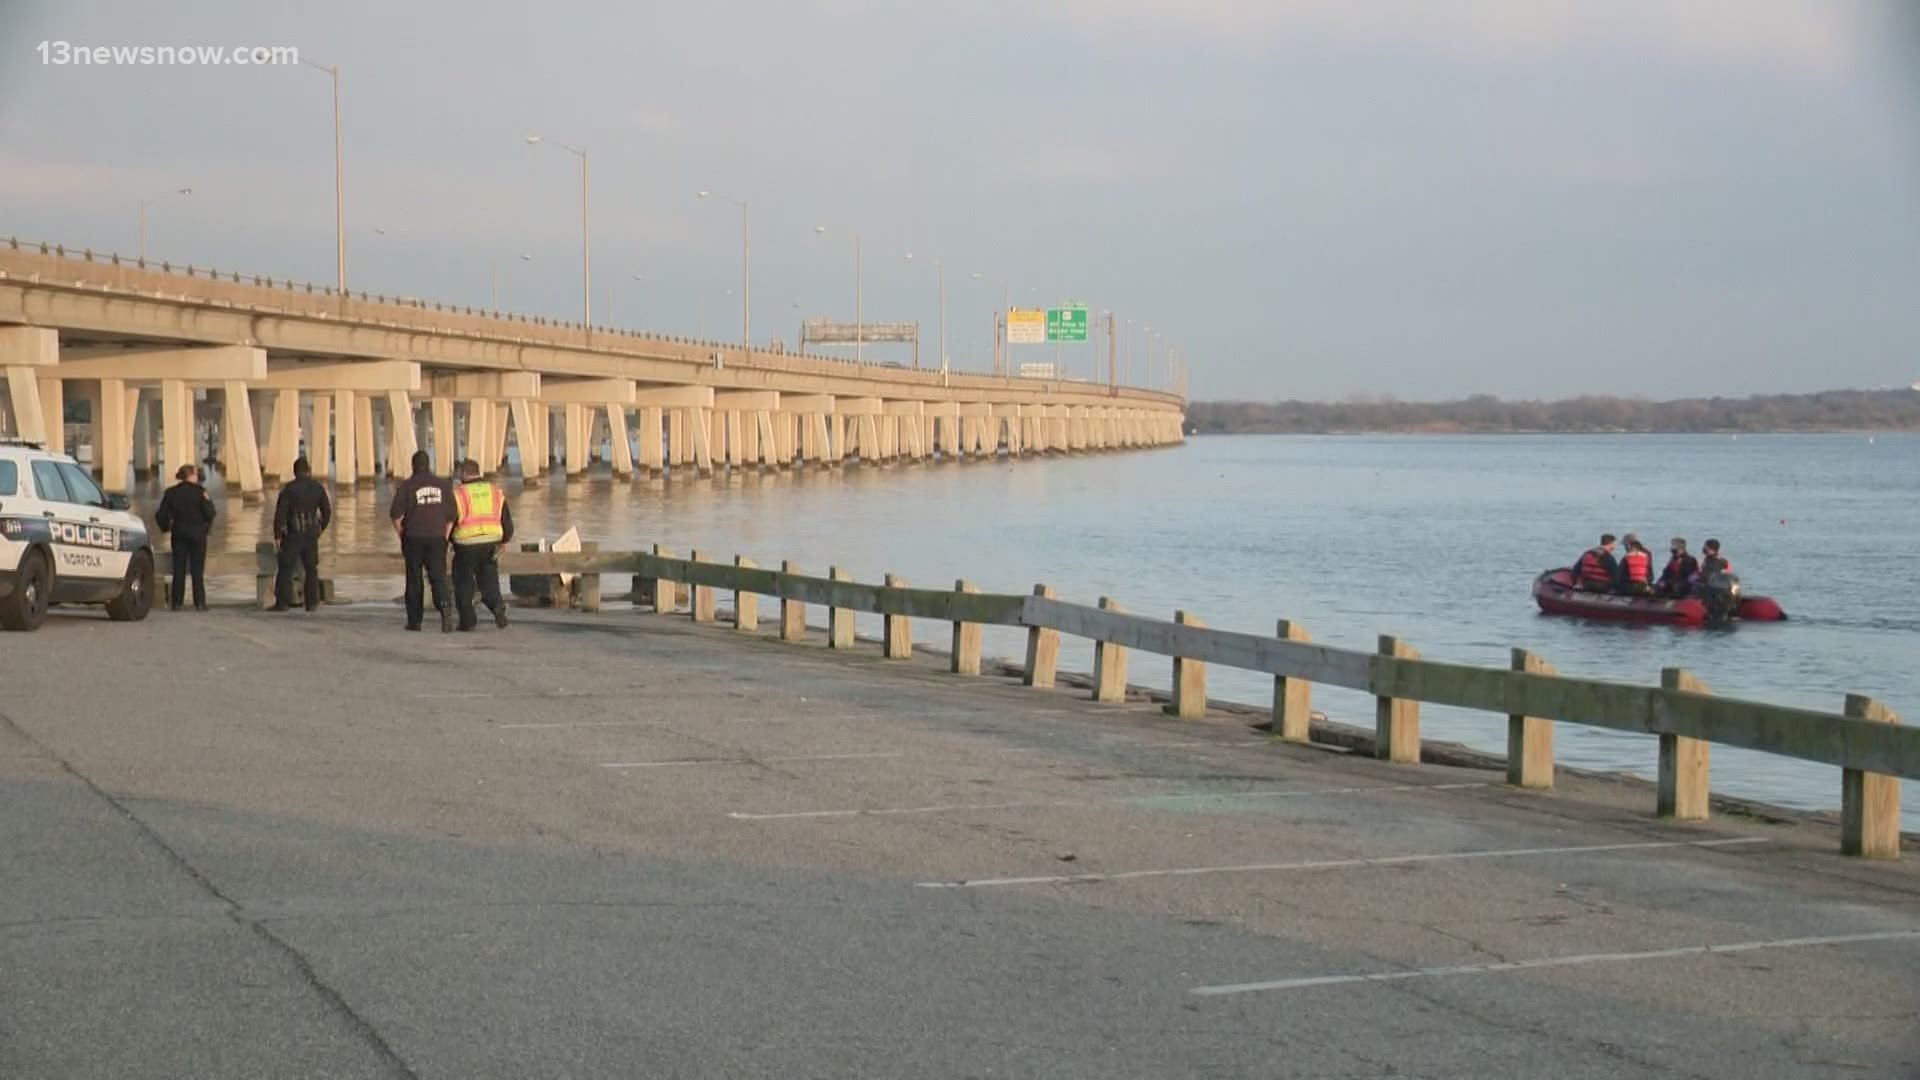 Police are investigating after a woman's body was found in the water on Willoughby Spit in Norfolk, they said it is being handled as an undetermined death.